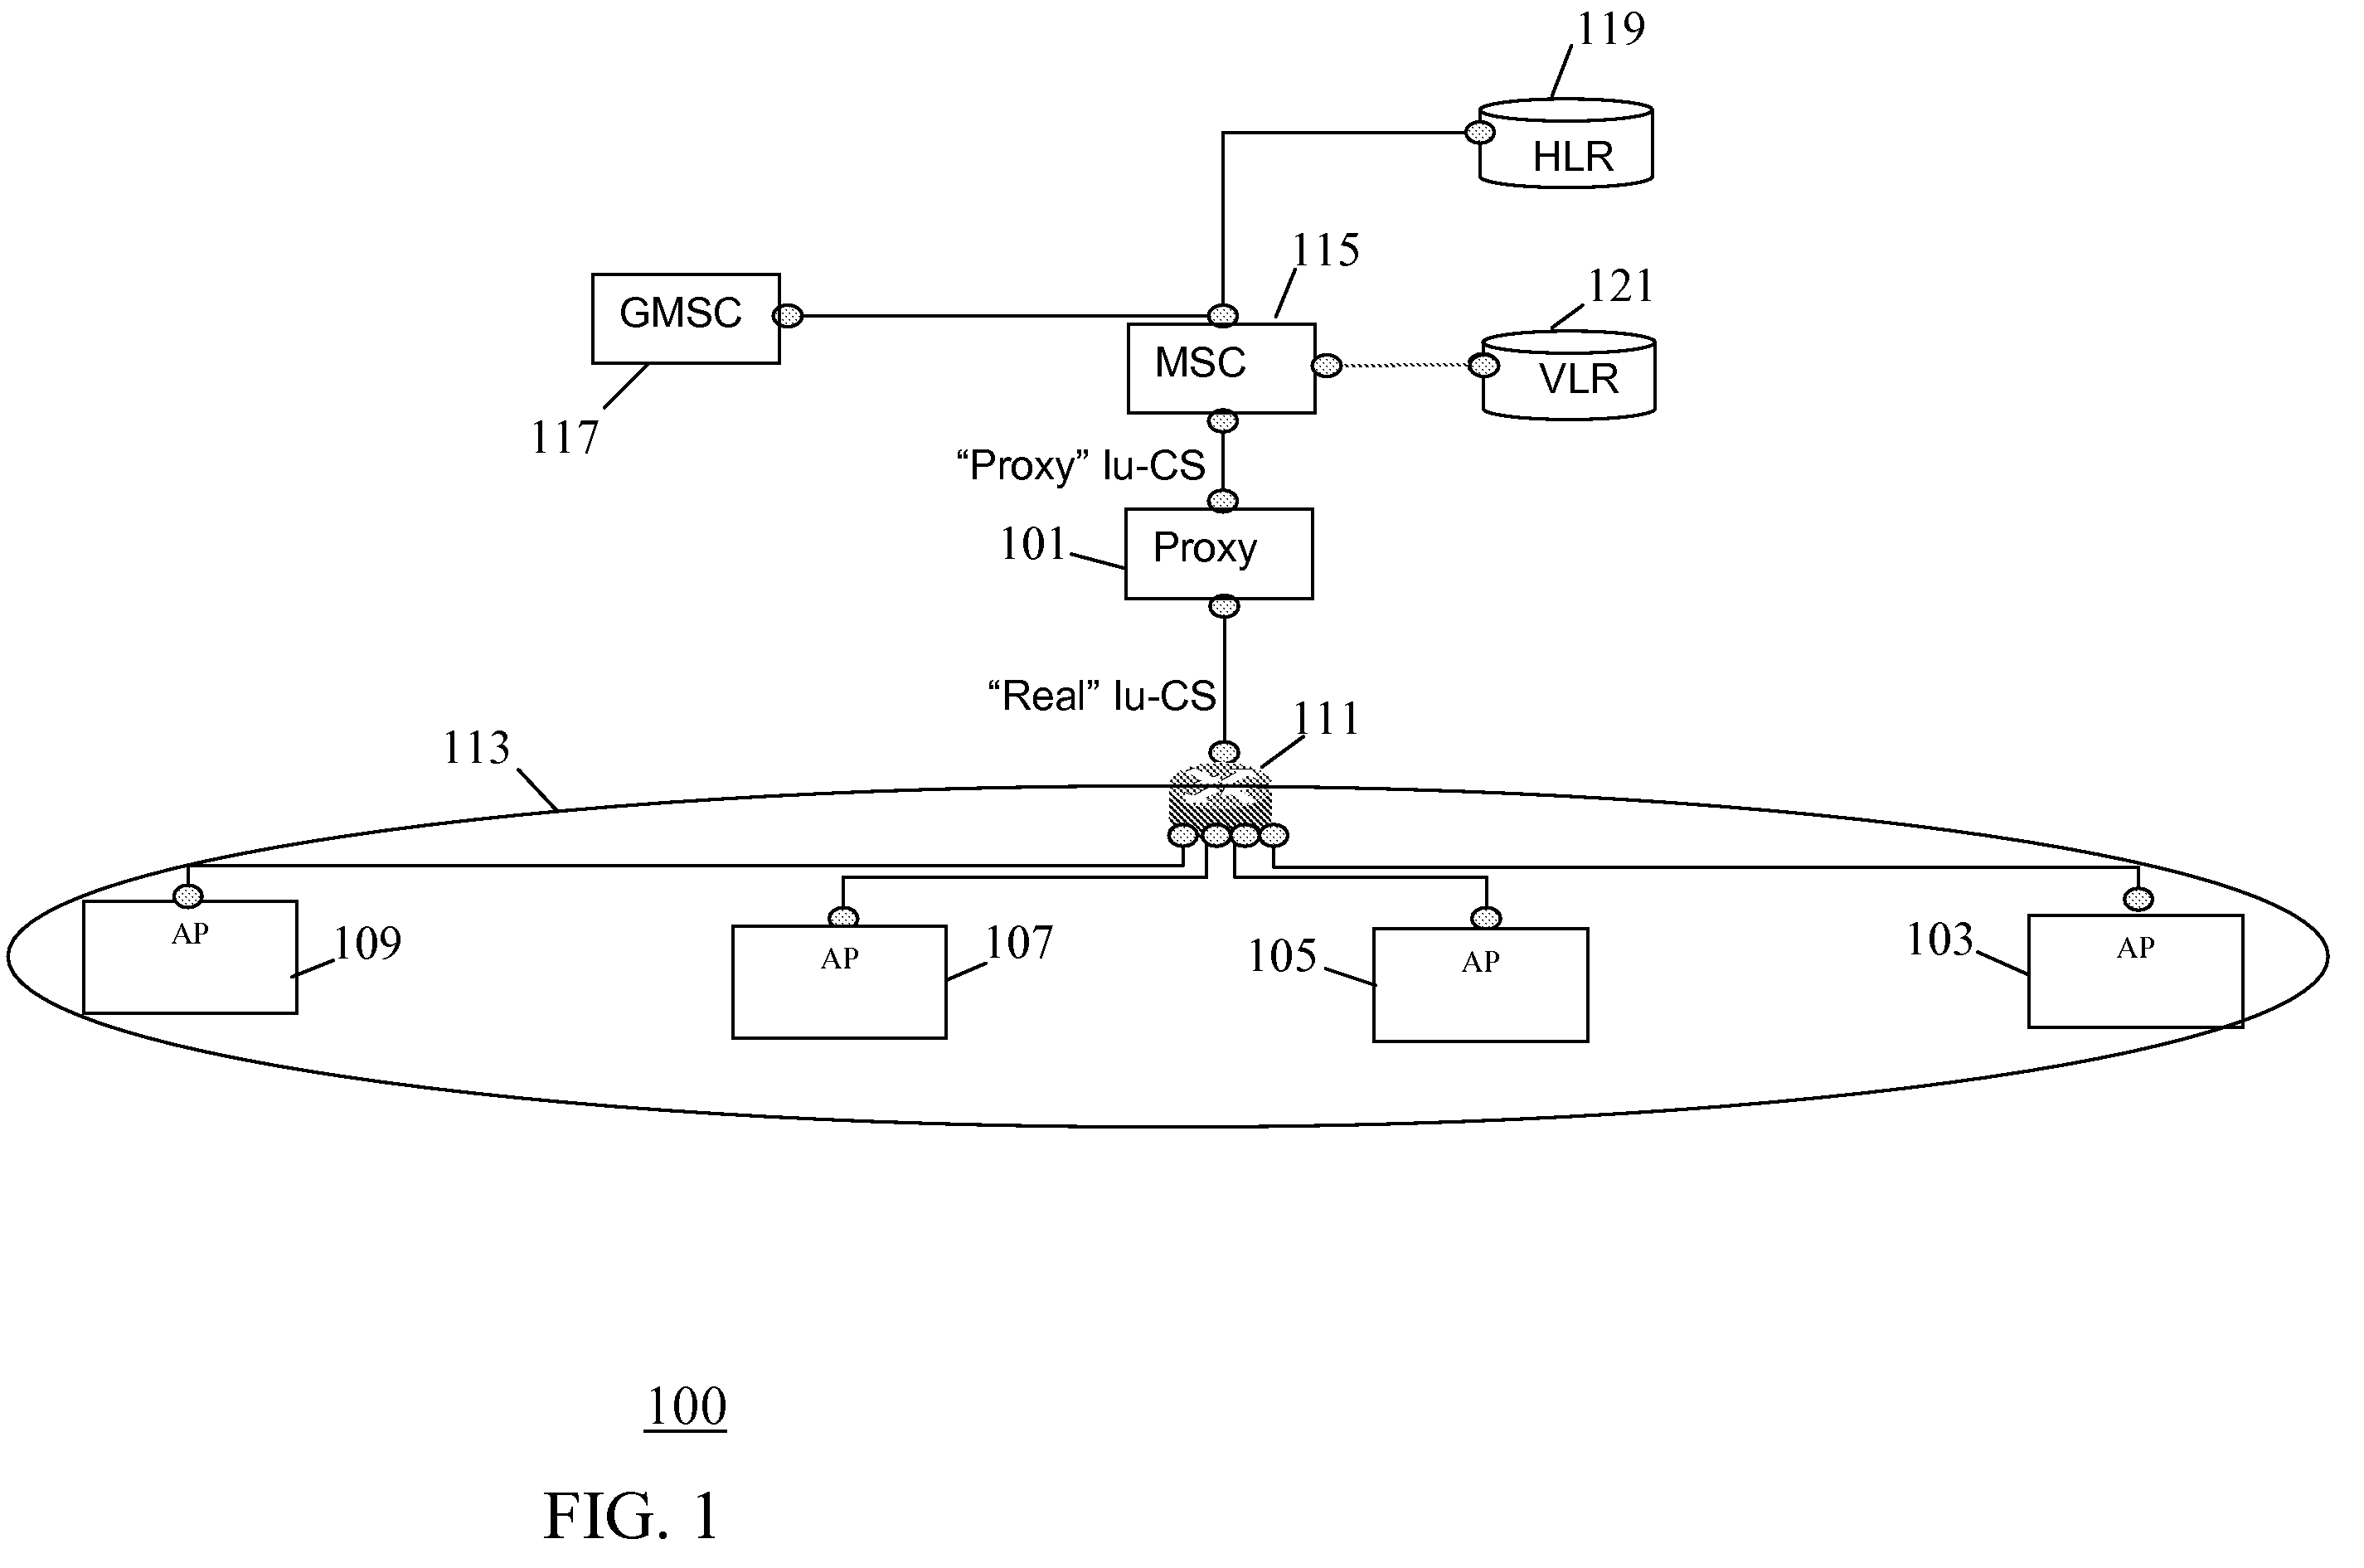 Network for a cellular communication system and a method of operation therefor